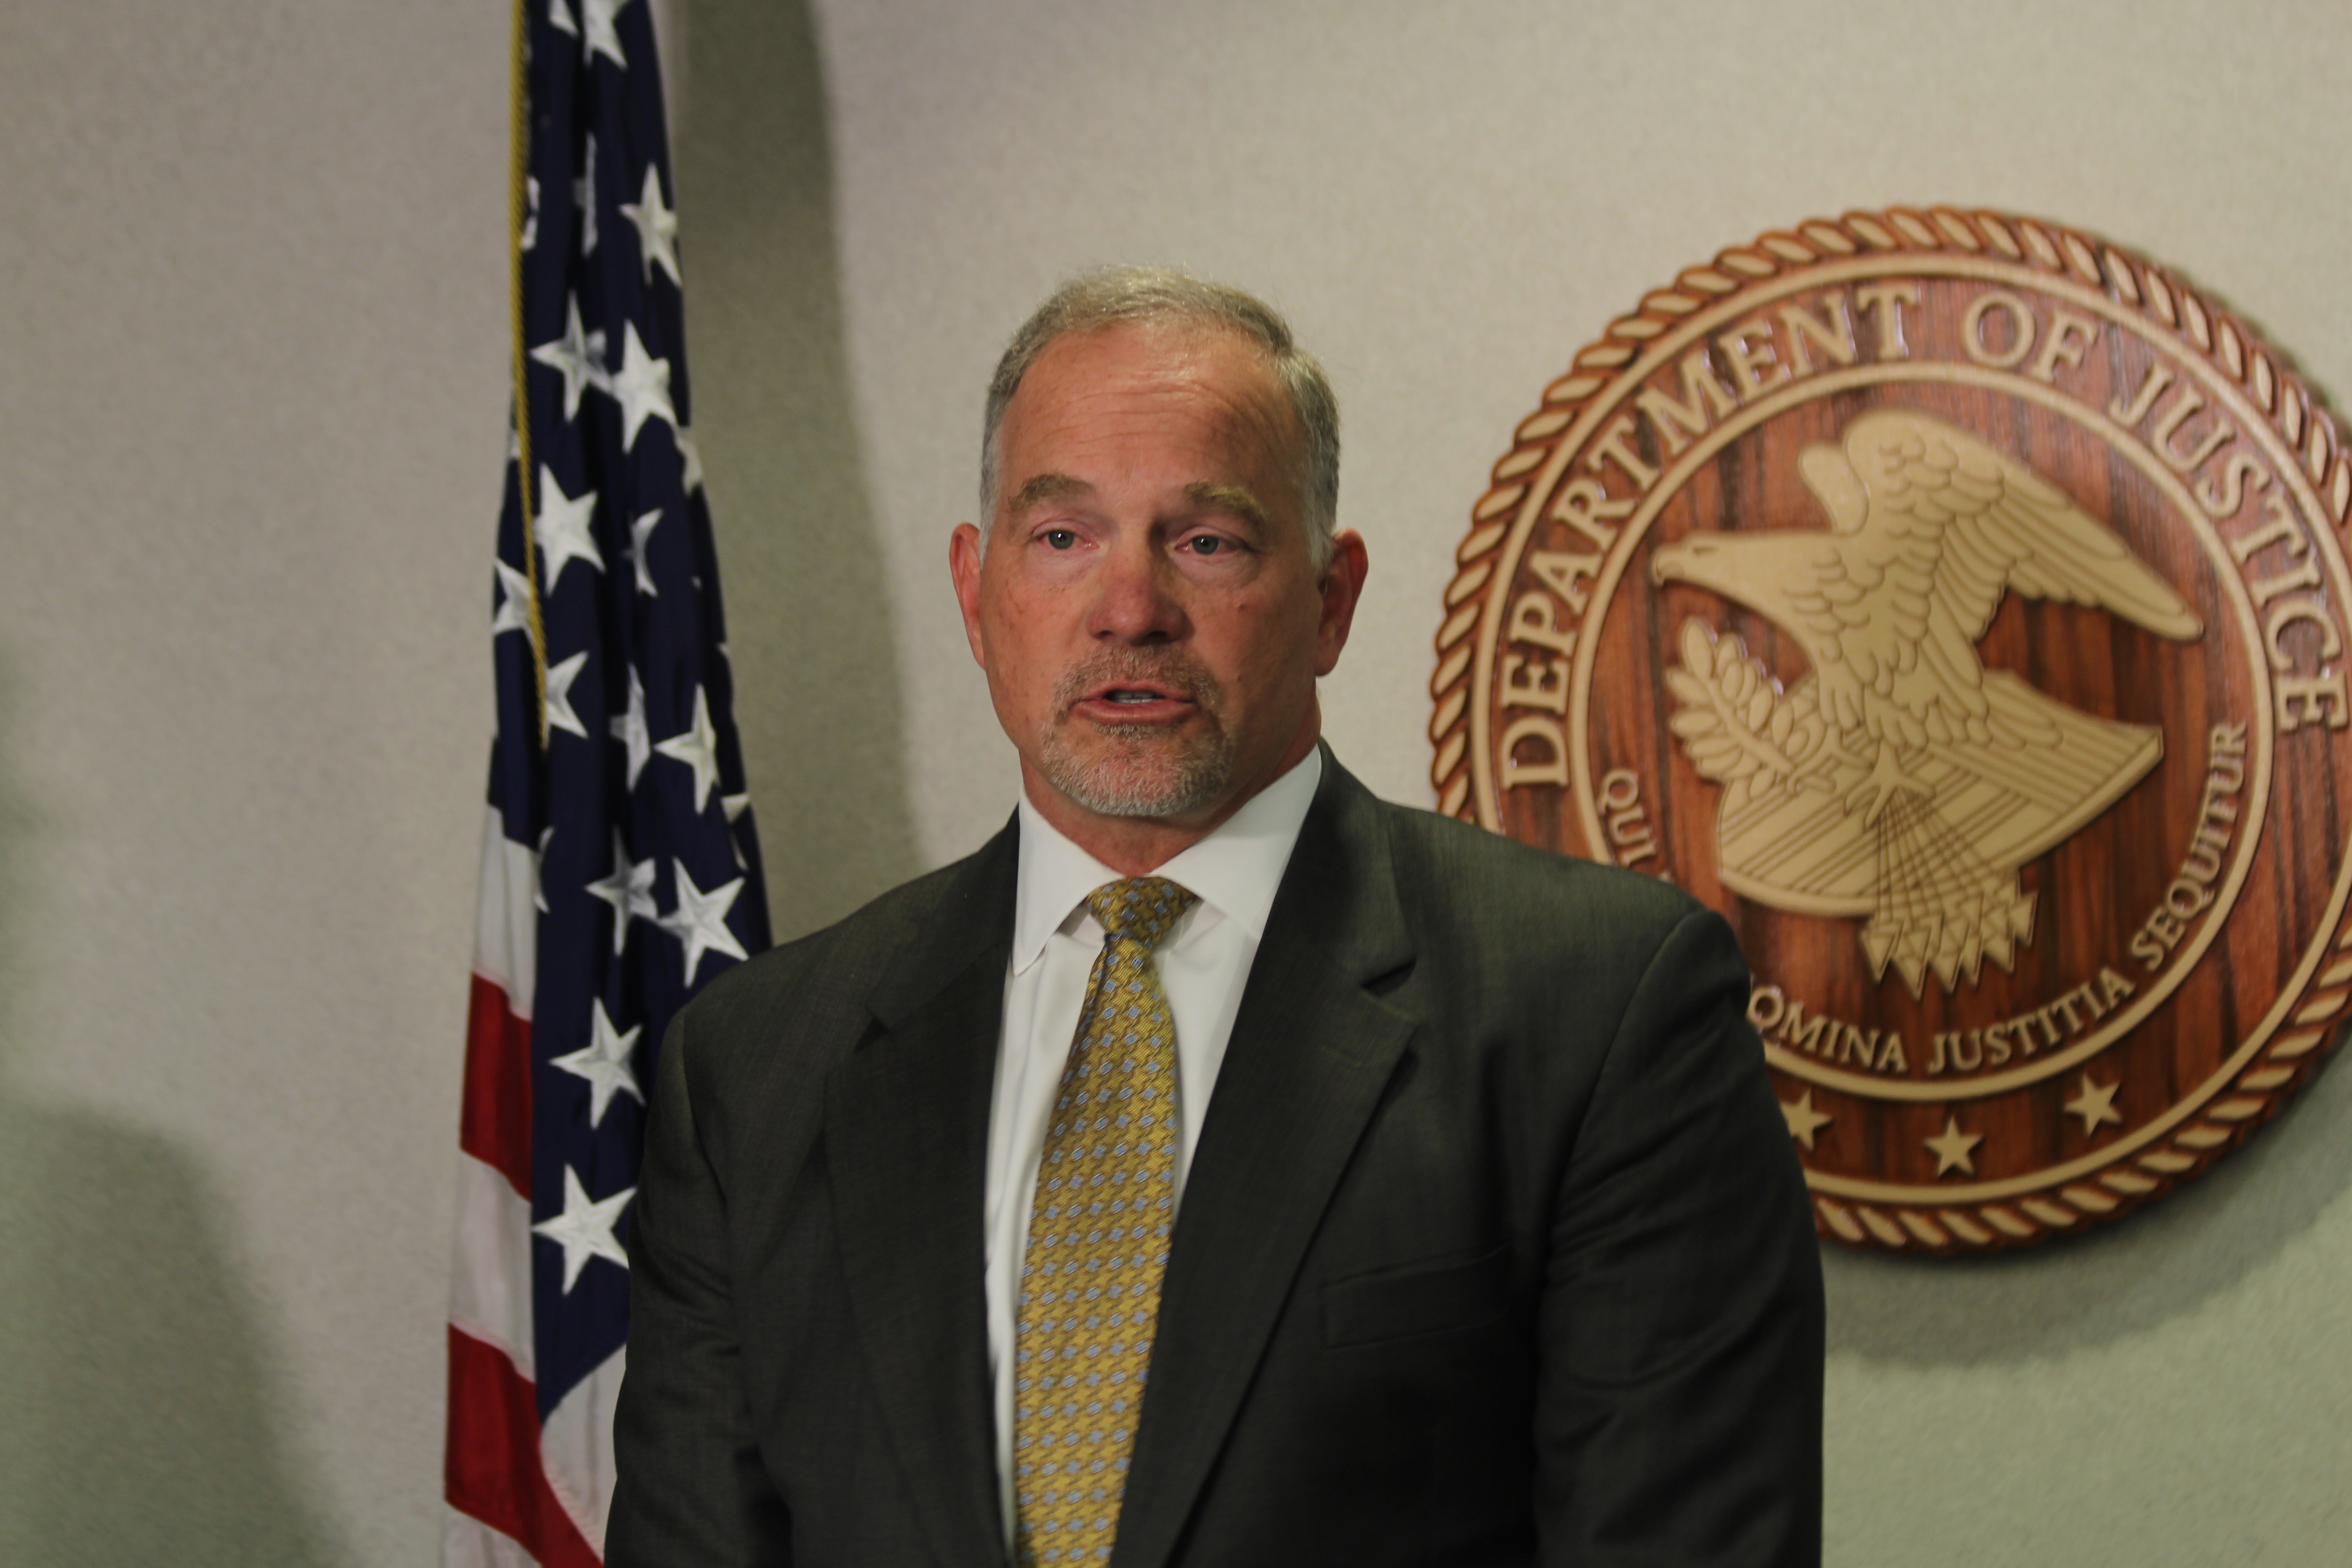 FBI special agent-in-charge Marlin Ritzman talks during a joint news conference Thursday, July 27, 2017, between Coast Guard, the U.S. Attorney's Office and the Federal Bureau of Investigation in regards to the charges in the death of Kristy Manzanarez. Her husband, Kenneth Ray Manzanarez is charged in her murder aboard the Emerald Princess cruise ship in Southeast Alaska. (Photo by Wesley Early/Alaska Public Media)